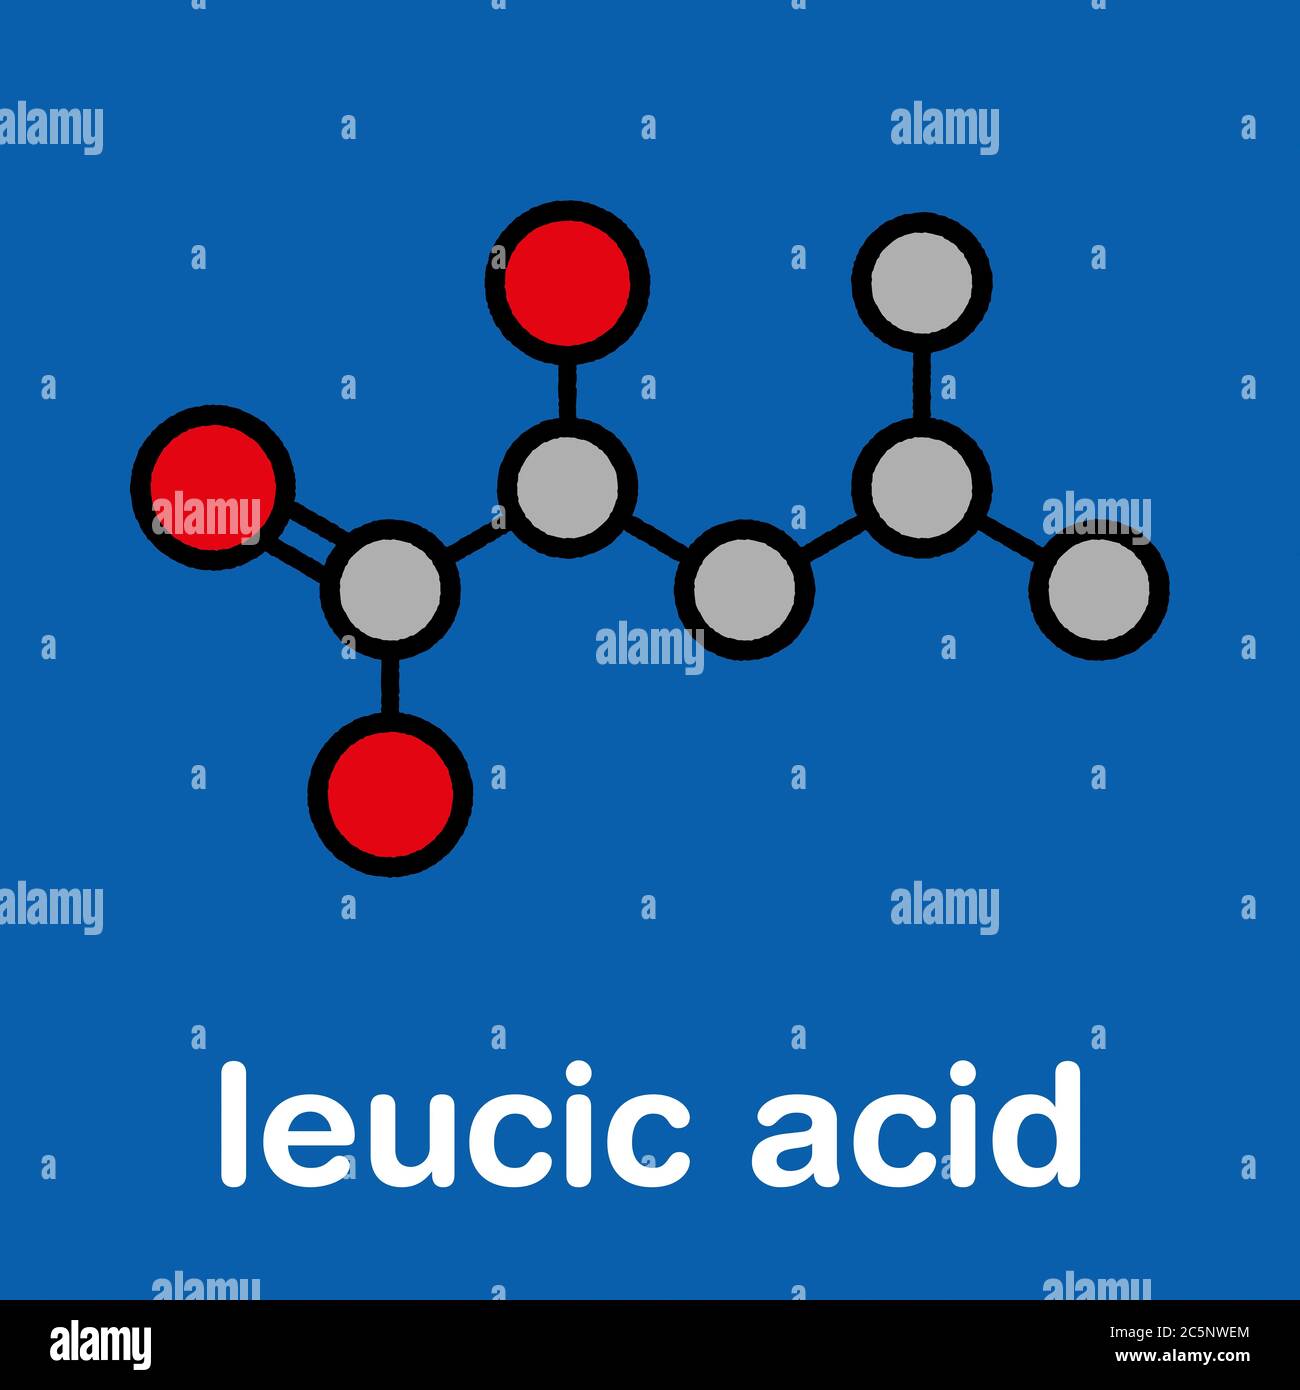 Leucic acid or HICA molecule. Stylized skeletal formula (chemical structure): Atoms are shown as color-coded circles: hydrogen (hidden), carbon (grey), oxygen (red). Stock Photo